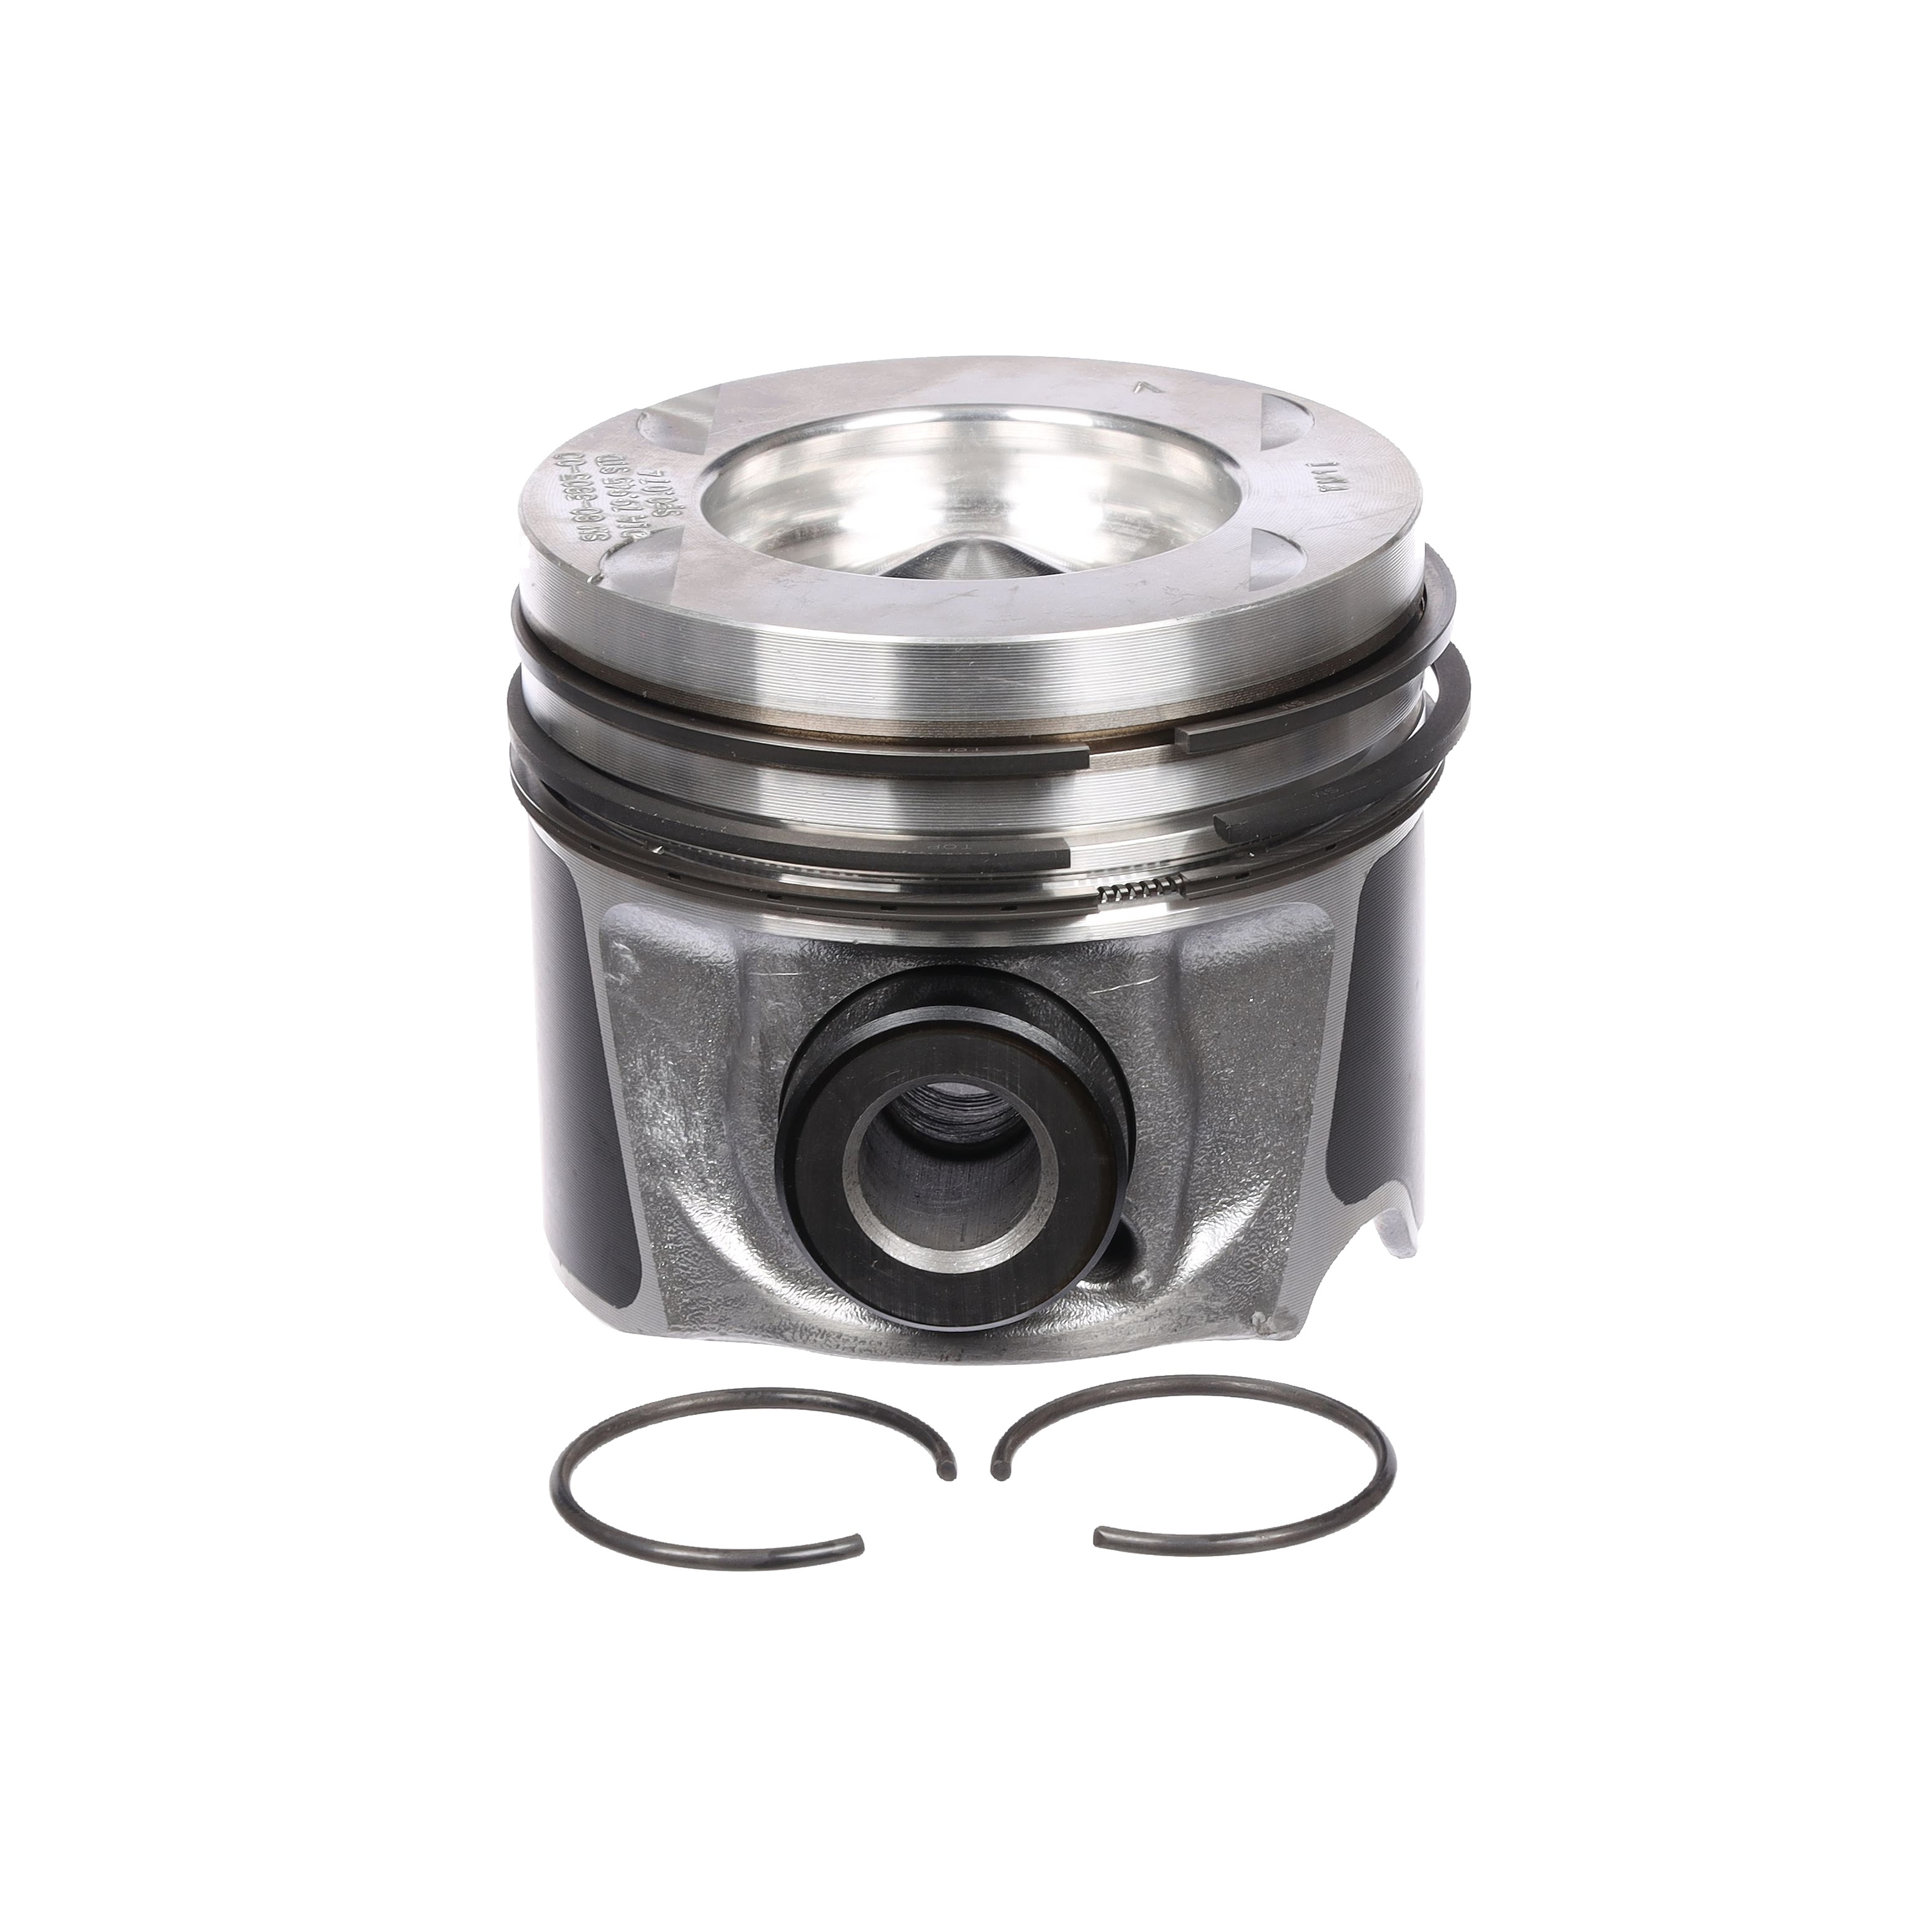 ET ENGINETEAM PM011100 Piston NISSAN experience and price